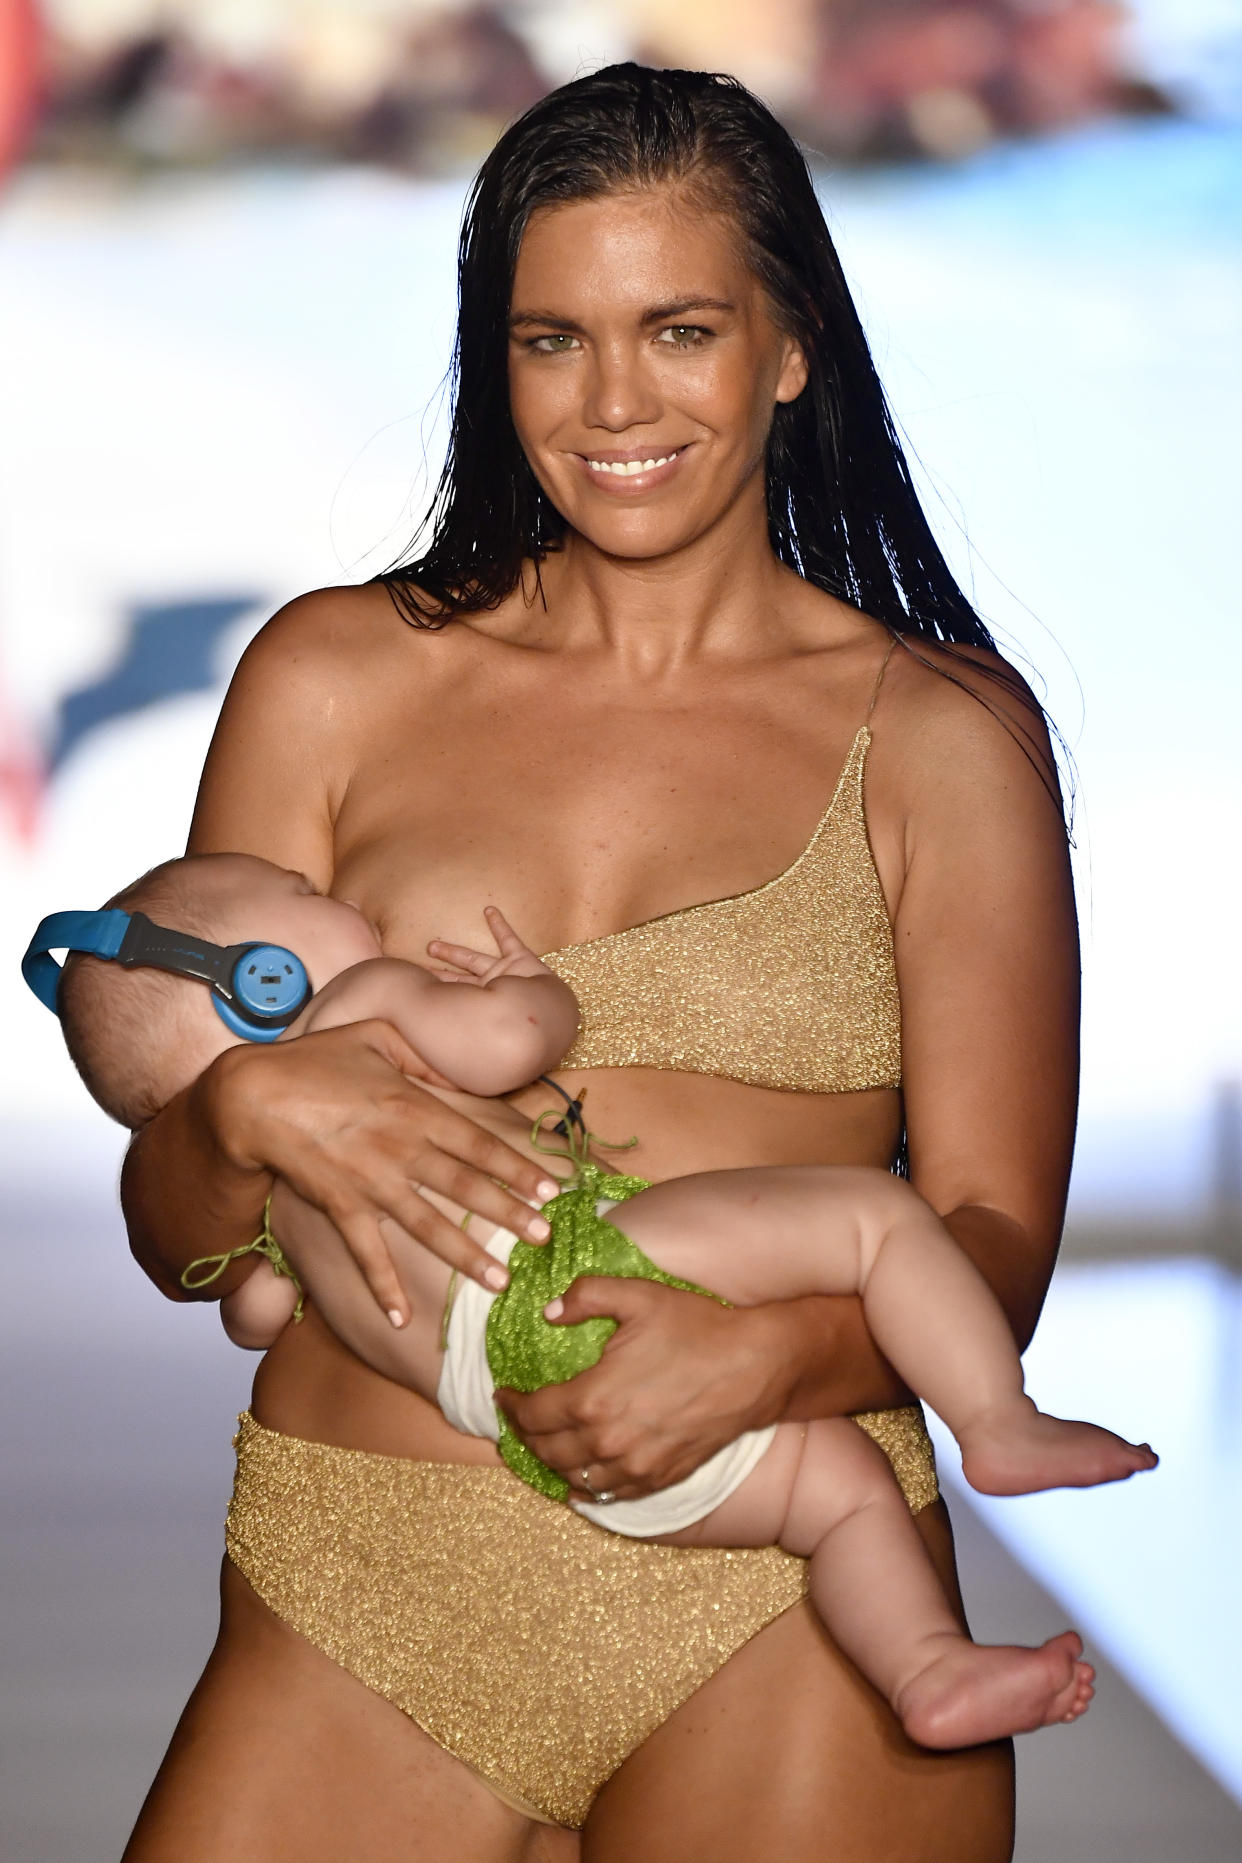 Multitasking Mama! Mara Martin hits the catwalk while breastfeeding her 5-month-old baby [Photo: Sports Illustrated for Getty]